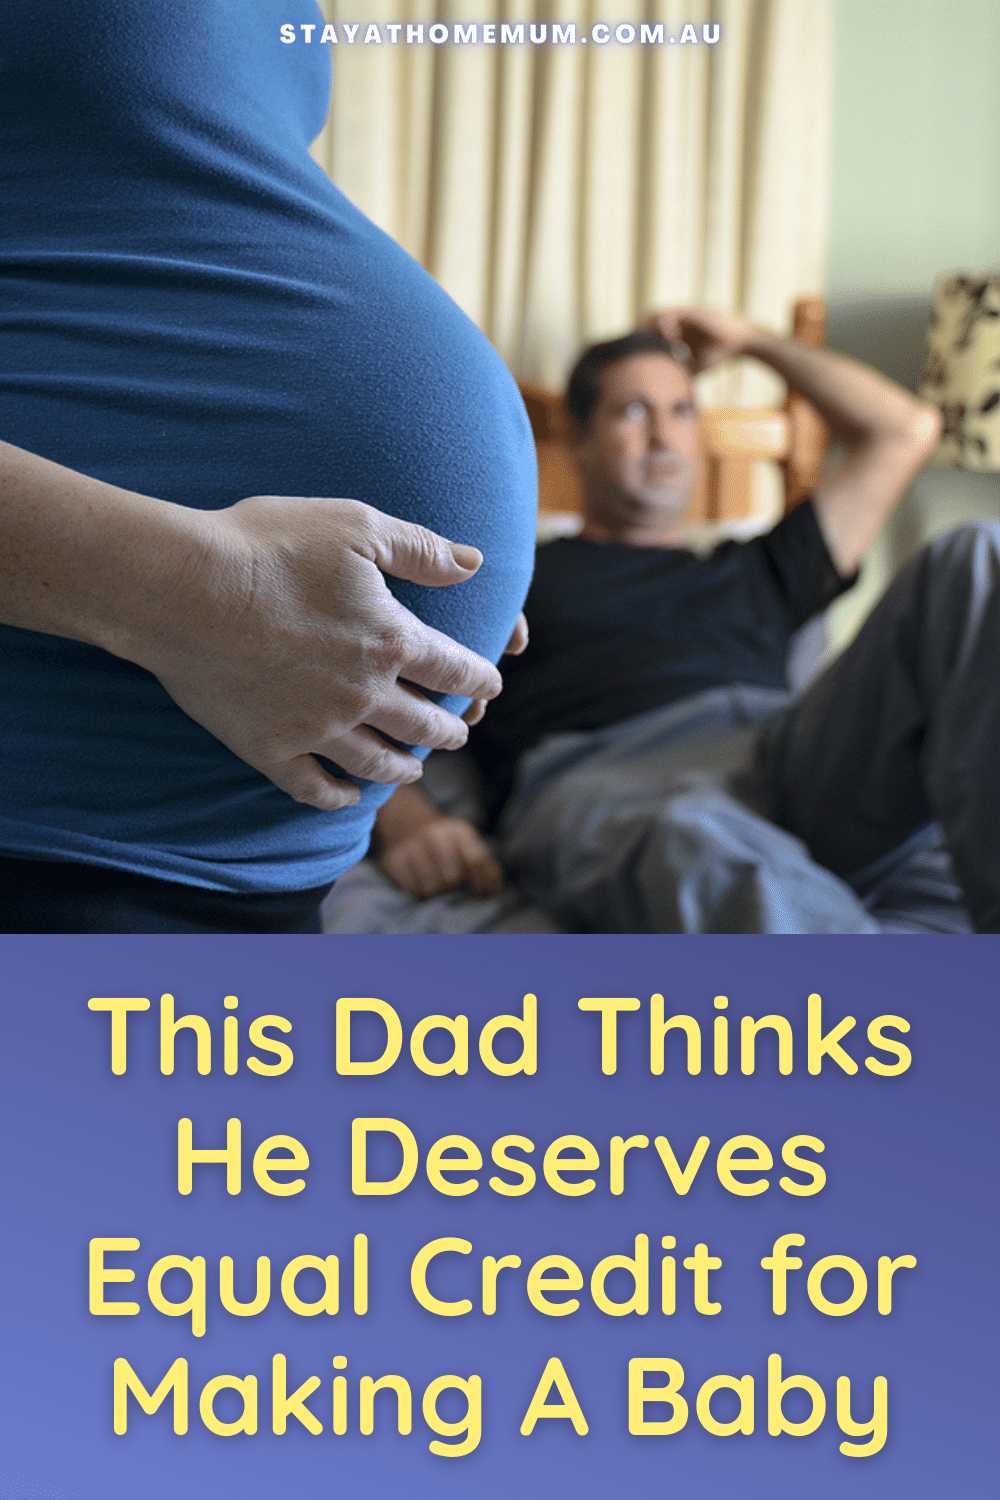 This Dad Thinks He Deserves Equal Credit for Making A Baby | Stay At Home Mum